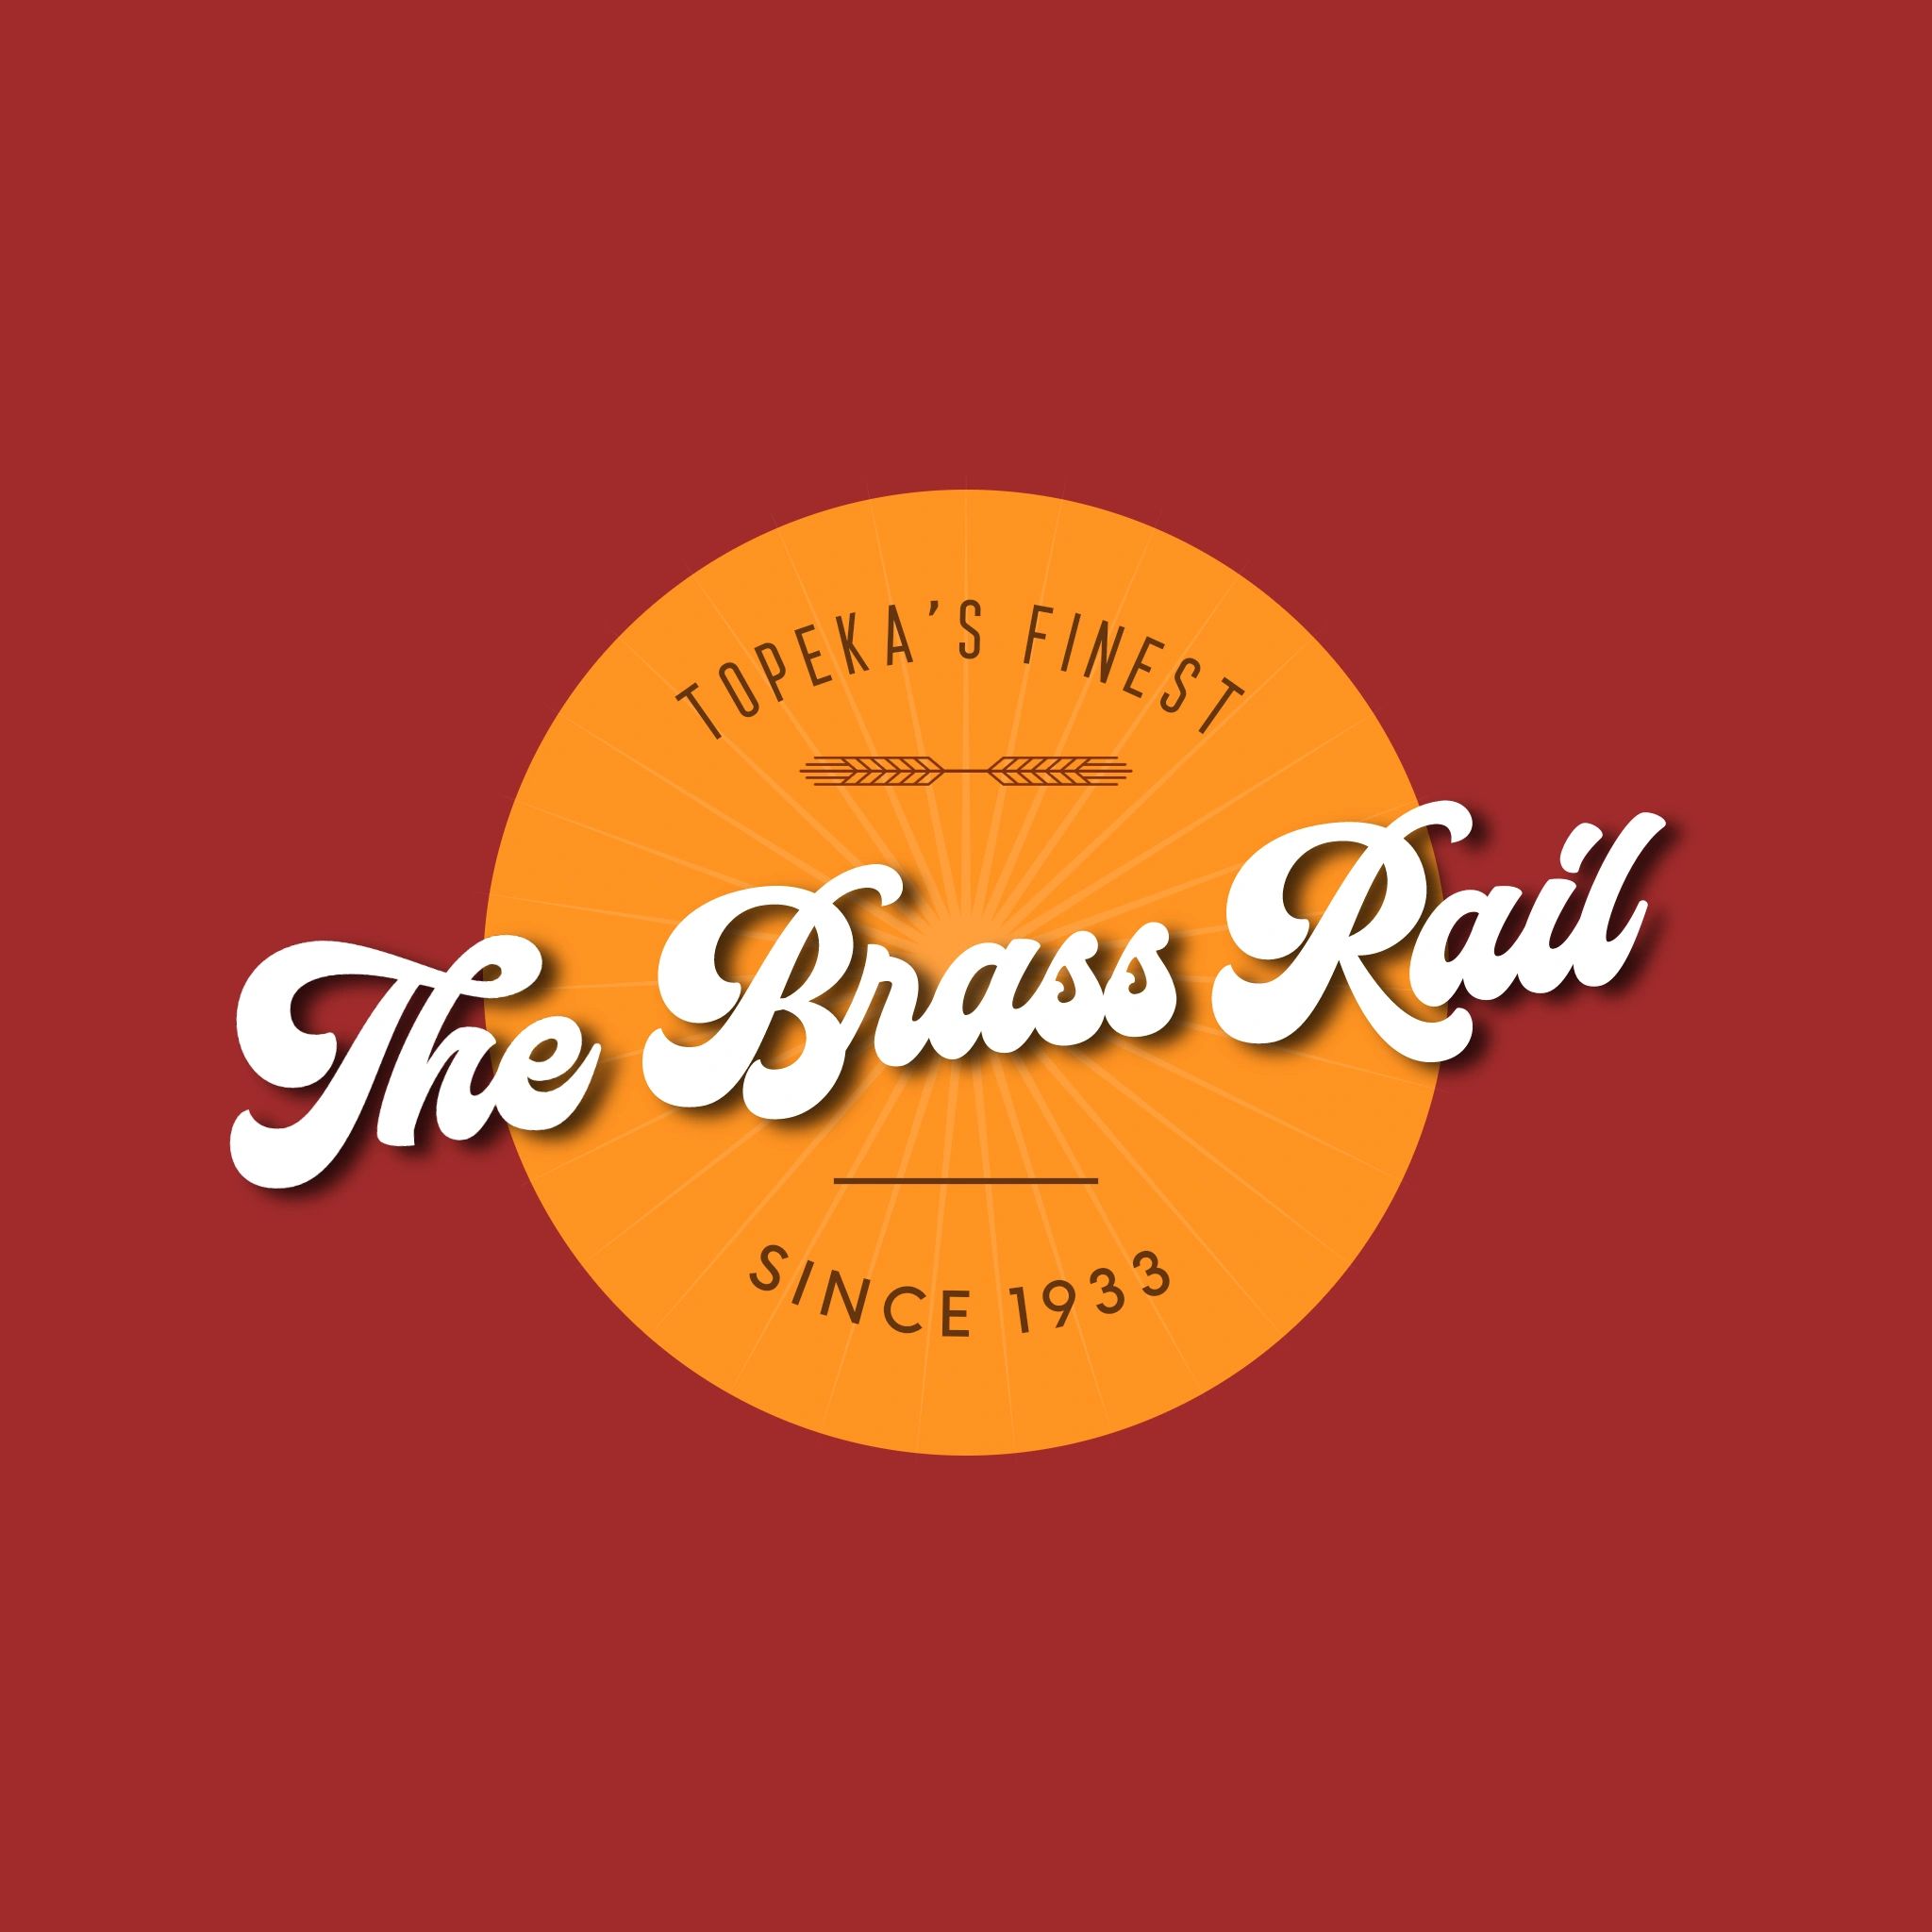 Live Music at Brass Rail Tavern - Enjoy Great Music and Drinks